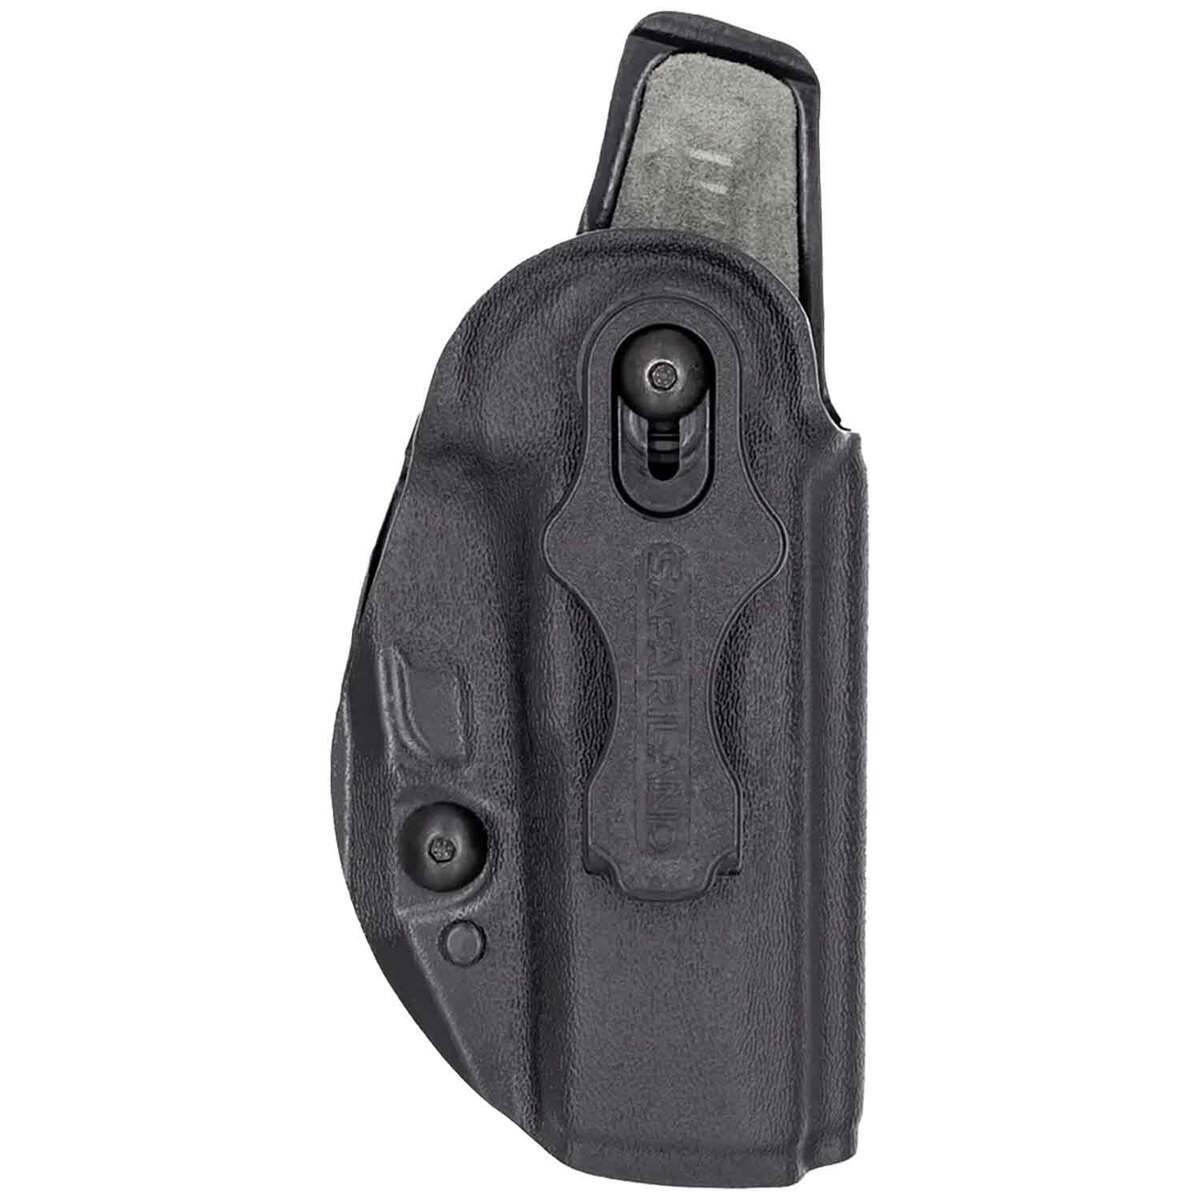 Lightbearing Tactical Outside Waistband Holster With Safariland